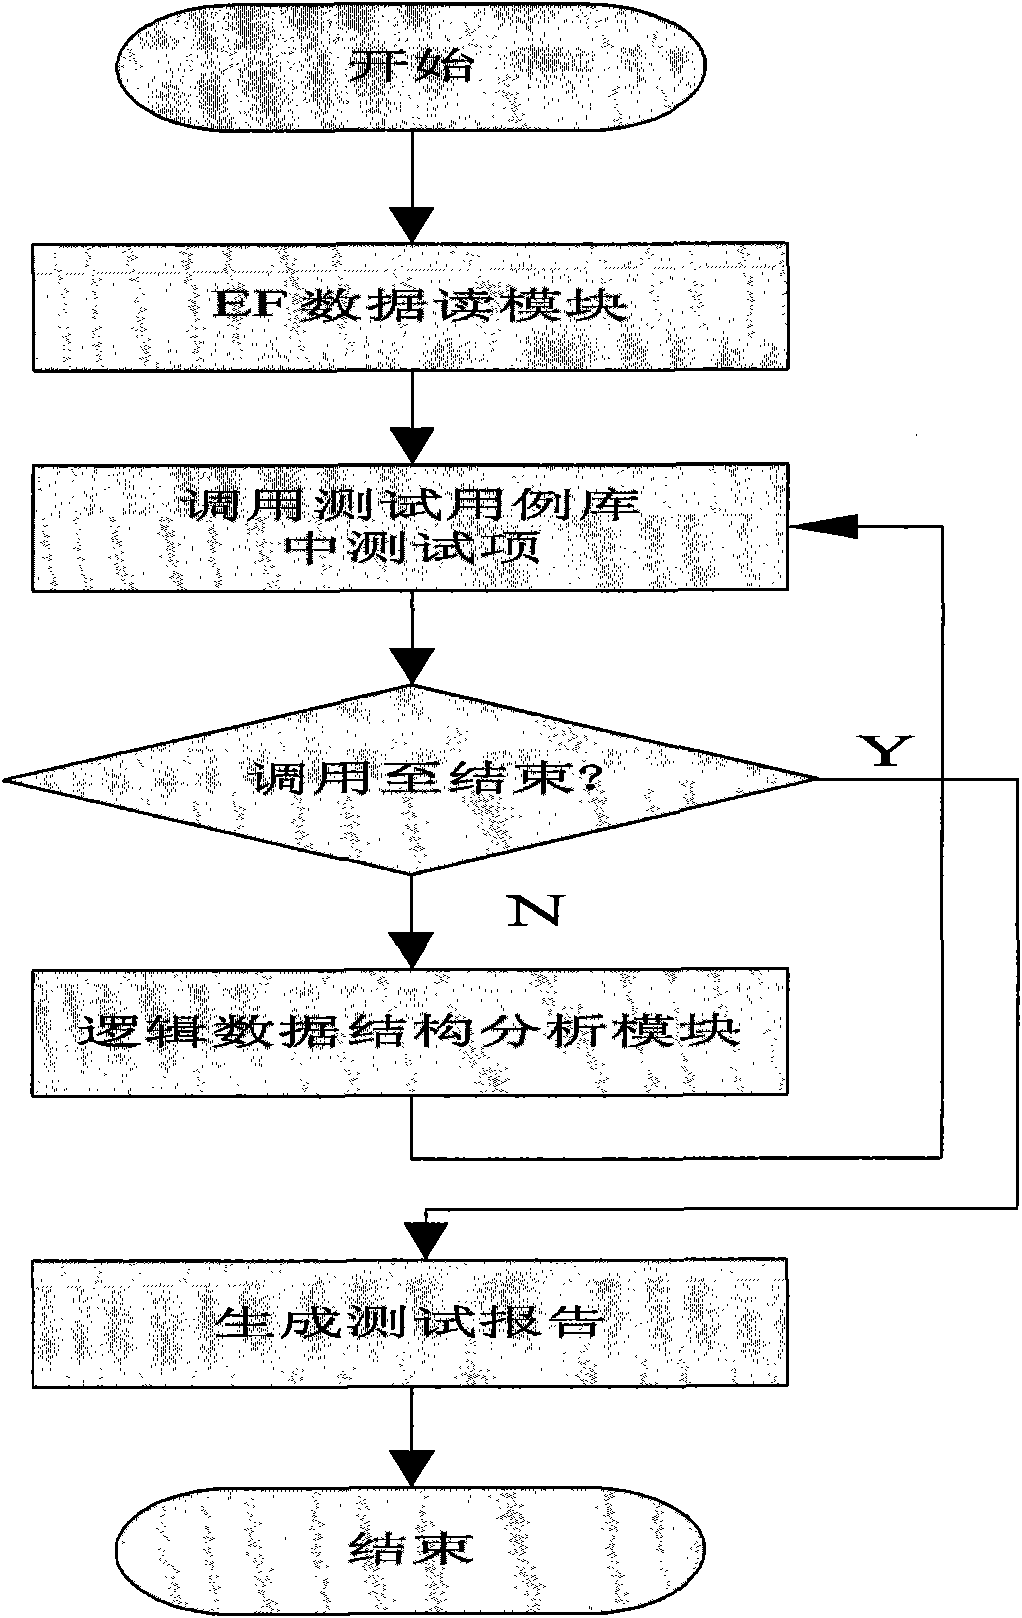 Method for testing and assessing application function and security mechanism of electronic passports